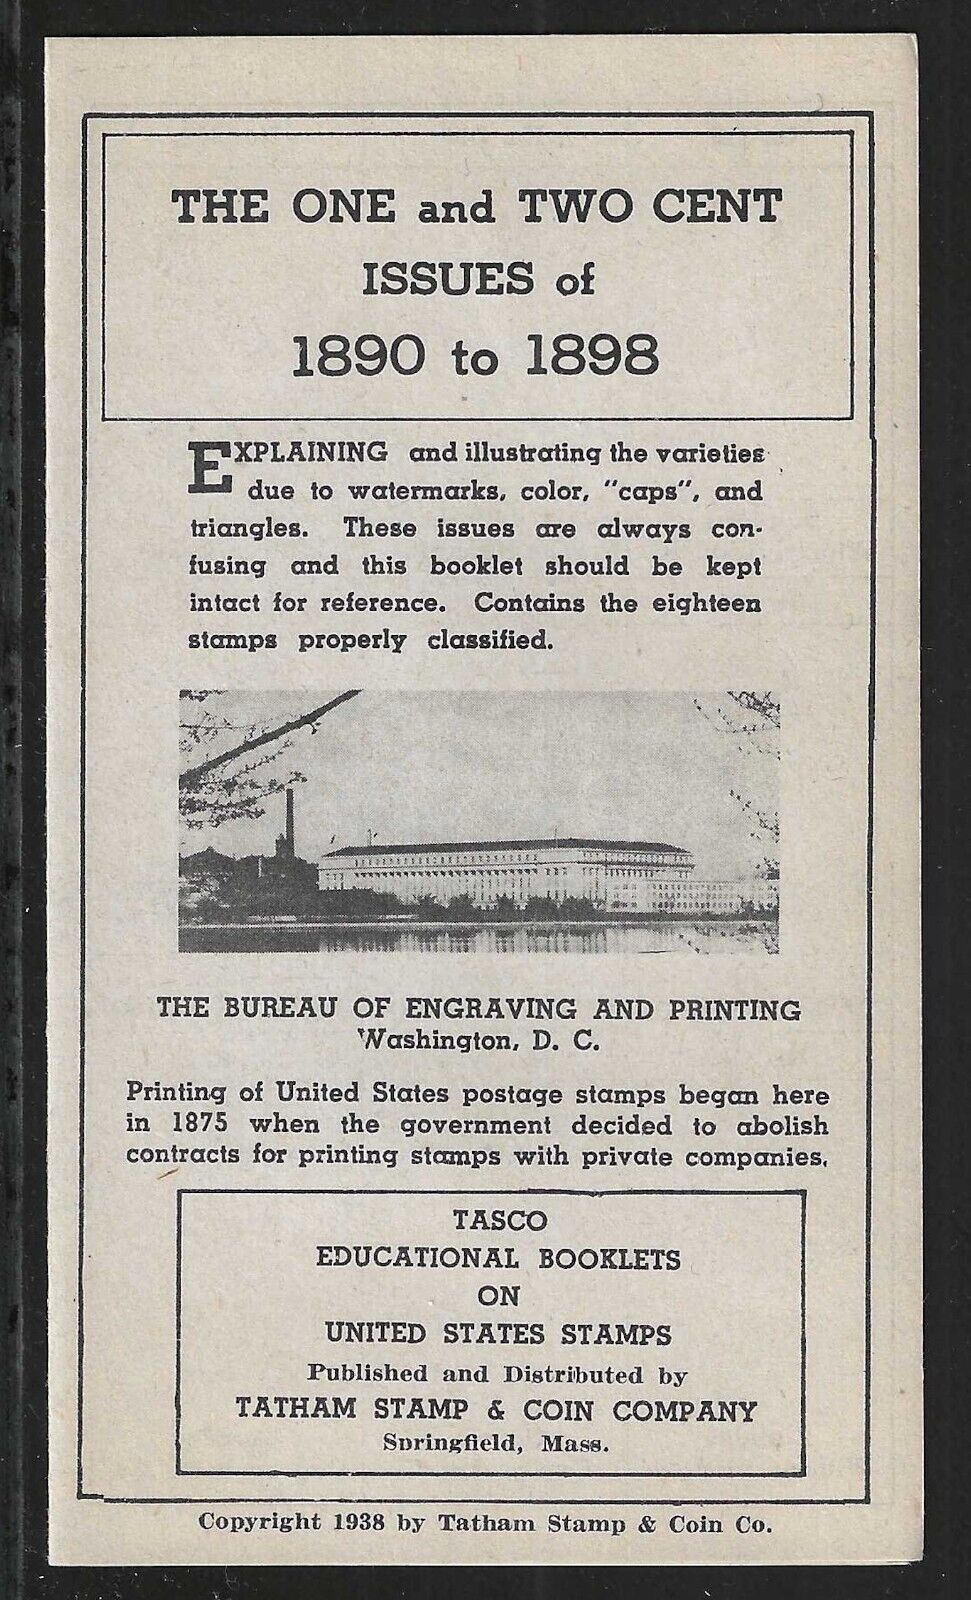 The One & Two-Cent Issues of 1890-1898, Tasco 1938 Educational  Booklet